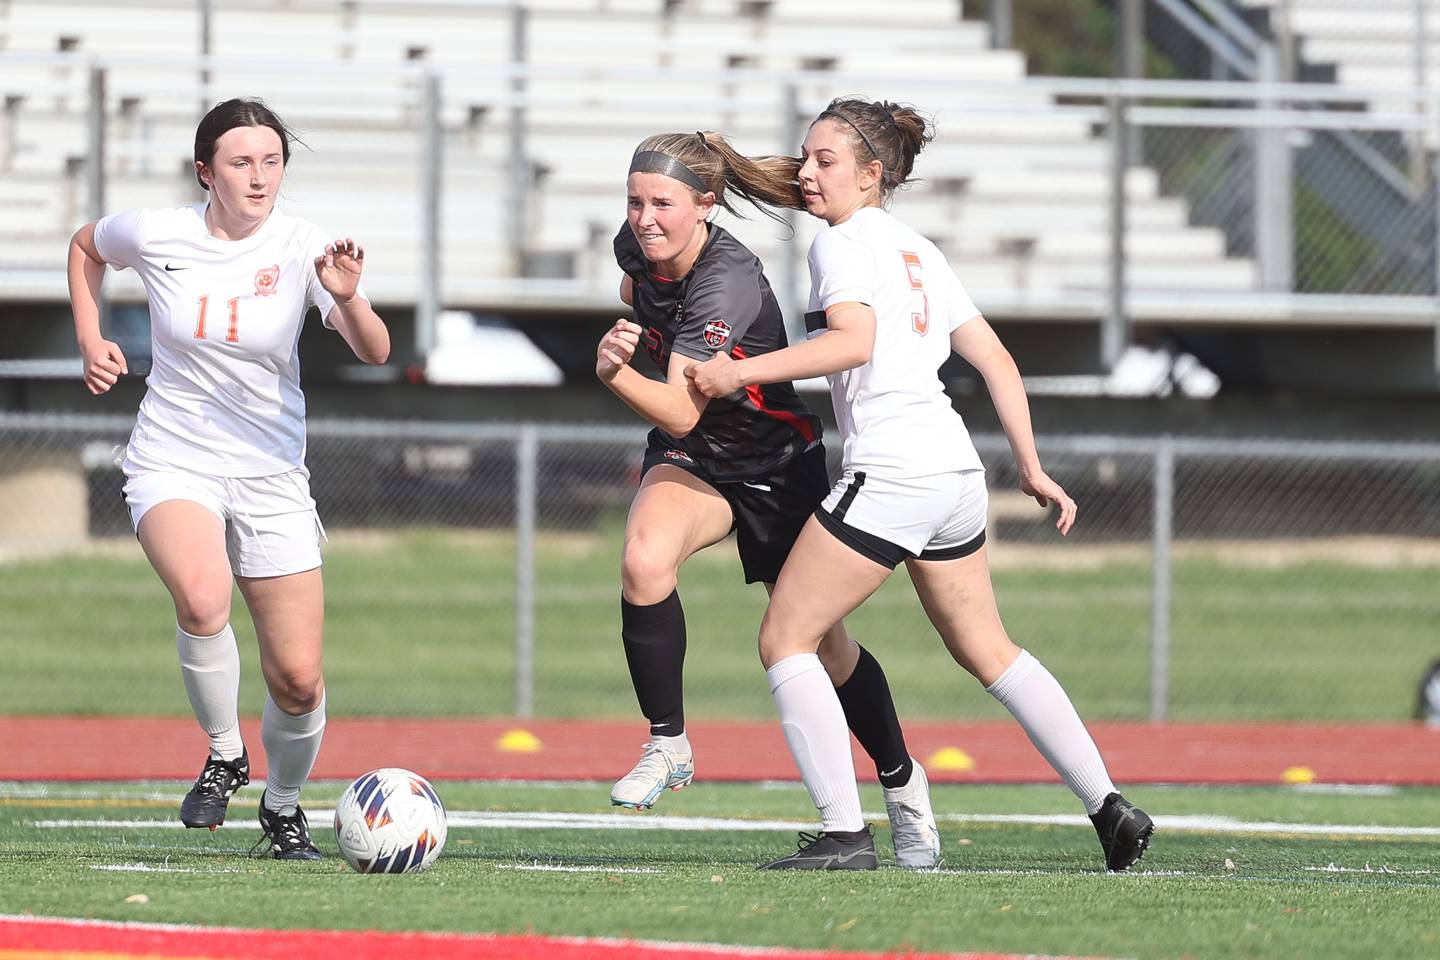 Lincoln-Way Central’s Madi Watt sprints past Shepard’s defense in the Class 3A Lincoln-Way Central Regional semi-final on Tuesday, May 16, 2023 in New Lenox.